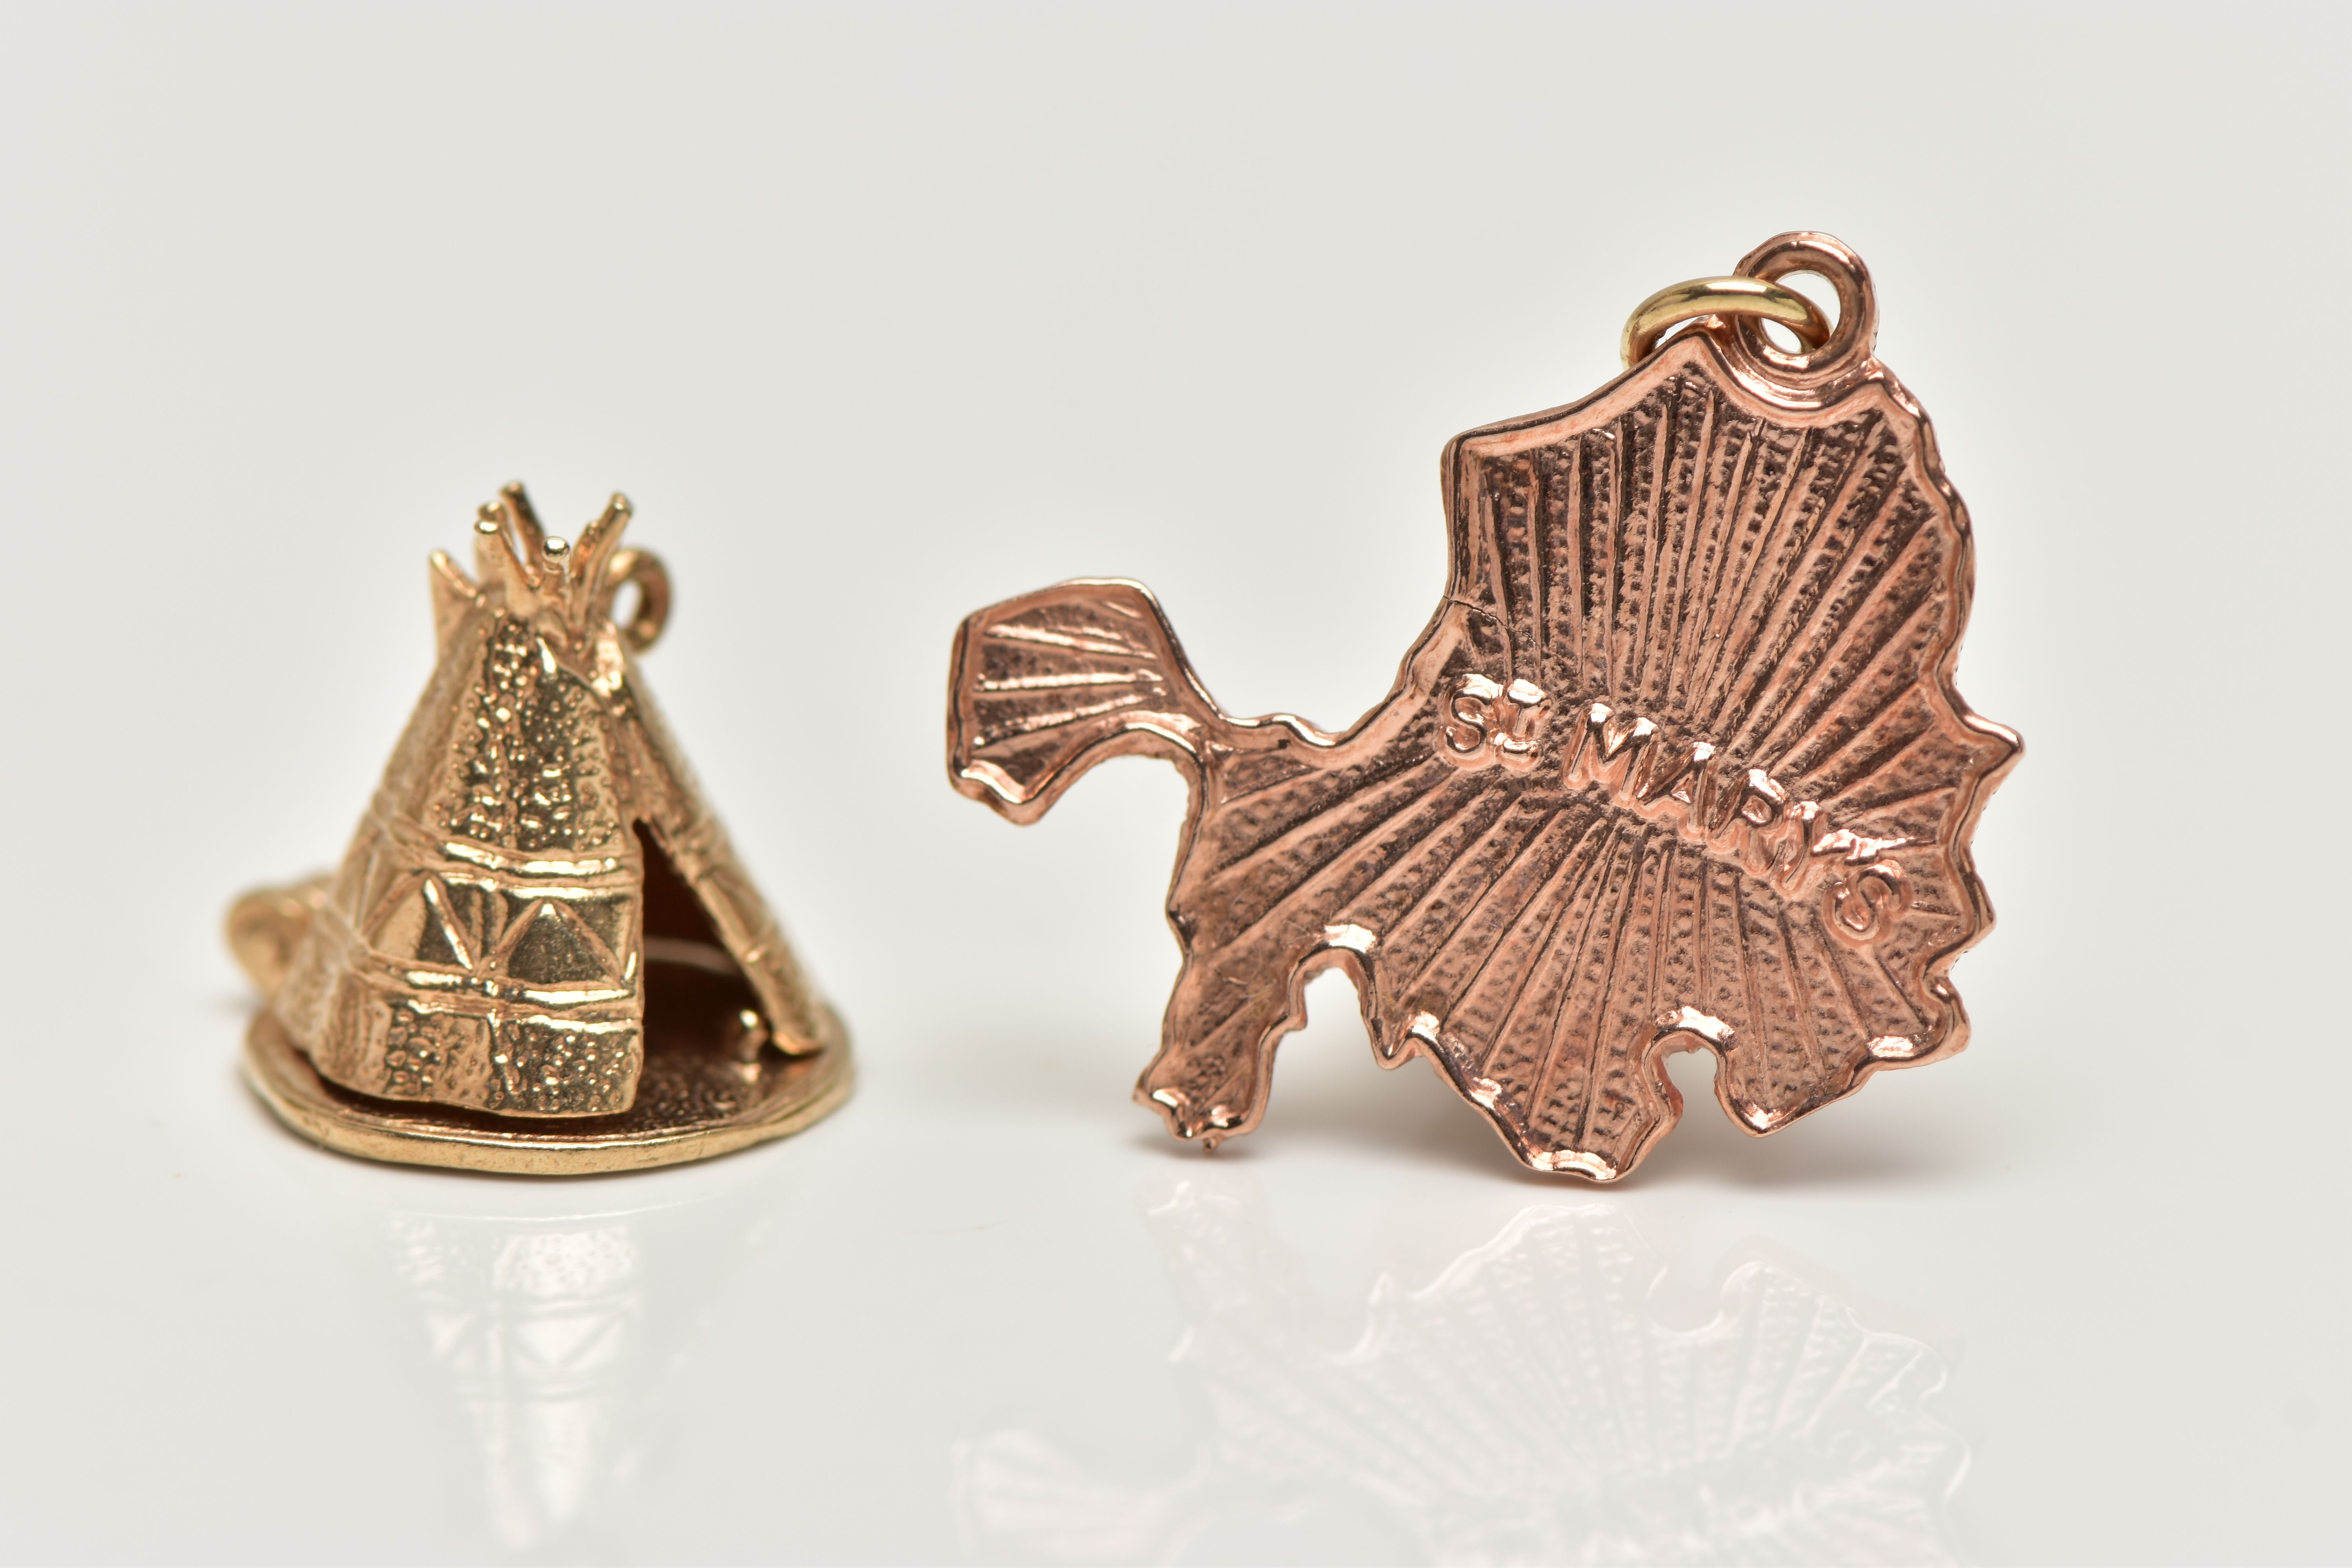 TWO 9CT GOLD CHARMS, the first a yellow gold charm of a tipi with a hinged base revealing a native